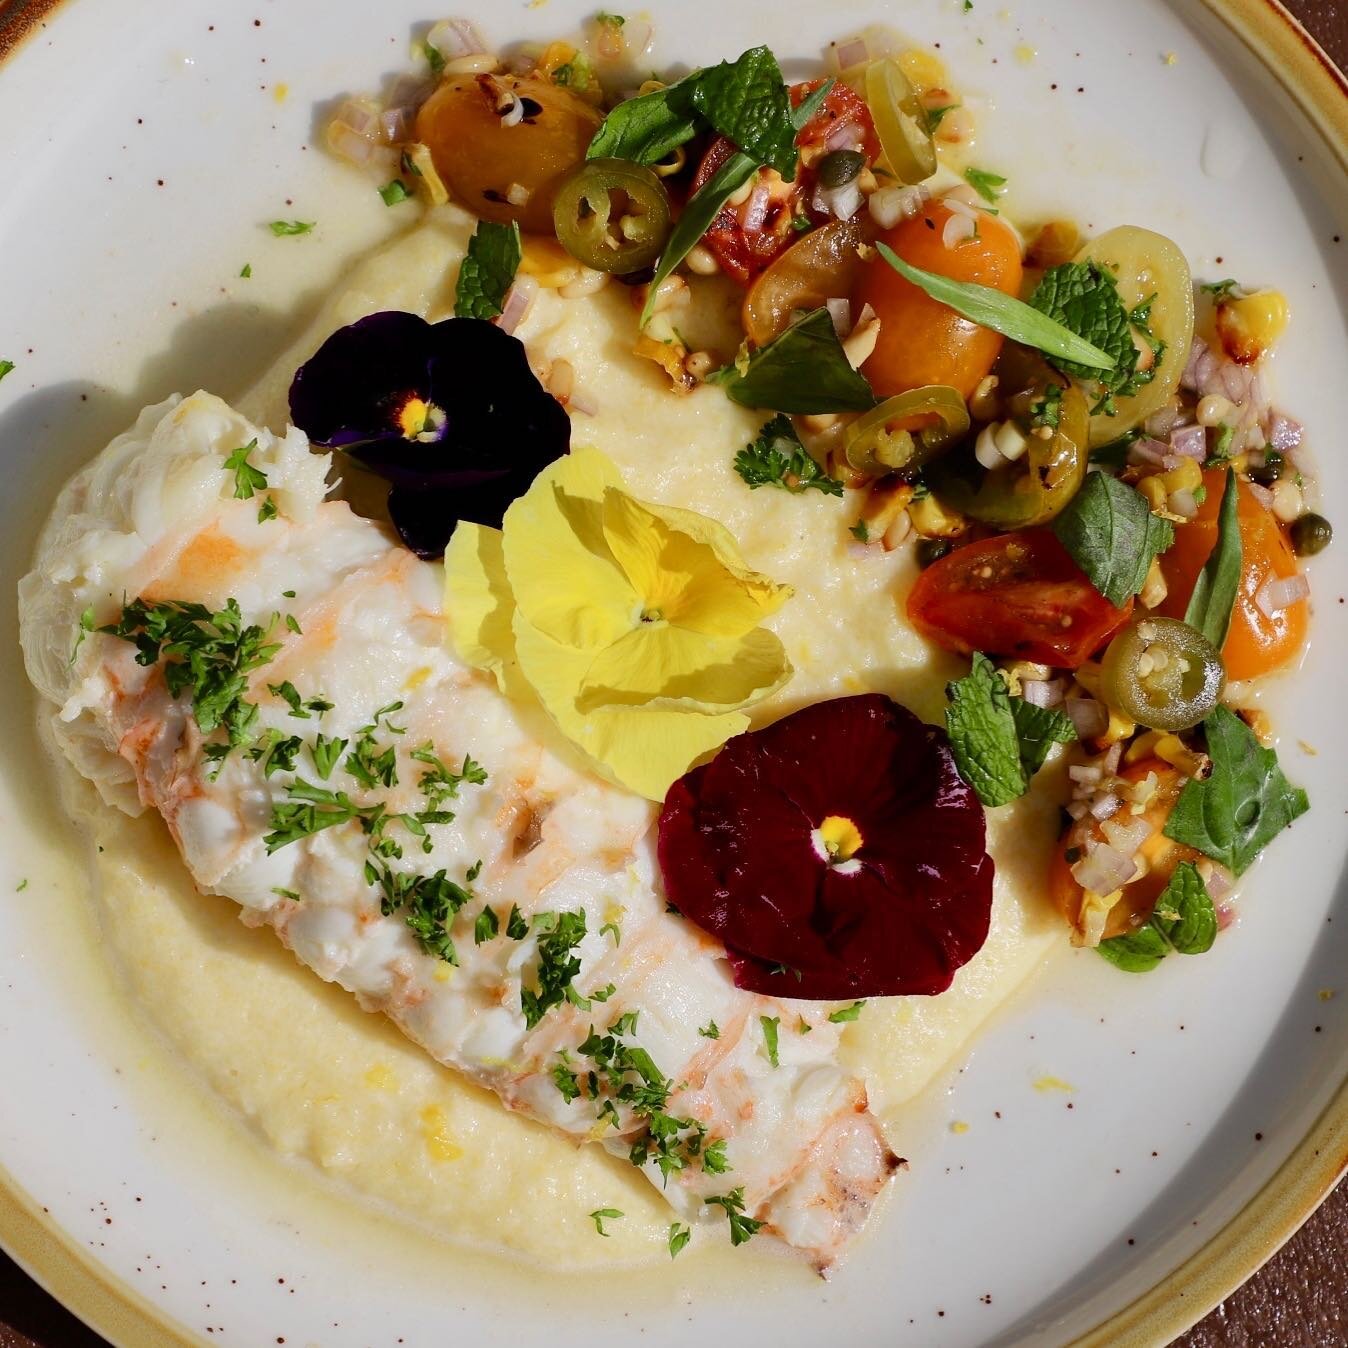 Butter Poached 10-12 oz. Cold Water Lobster Tail 🧈🦞 
Served over a Creamy Pecorino Polenta with a Roasted Summer Salad with Pine Nuts